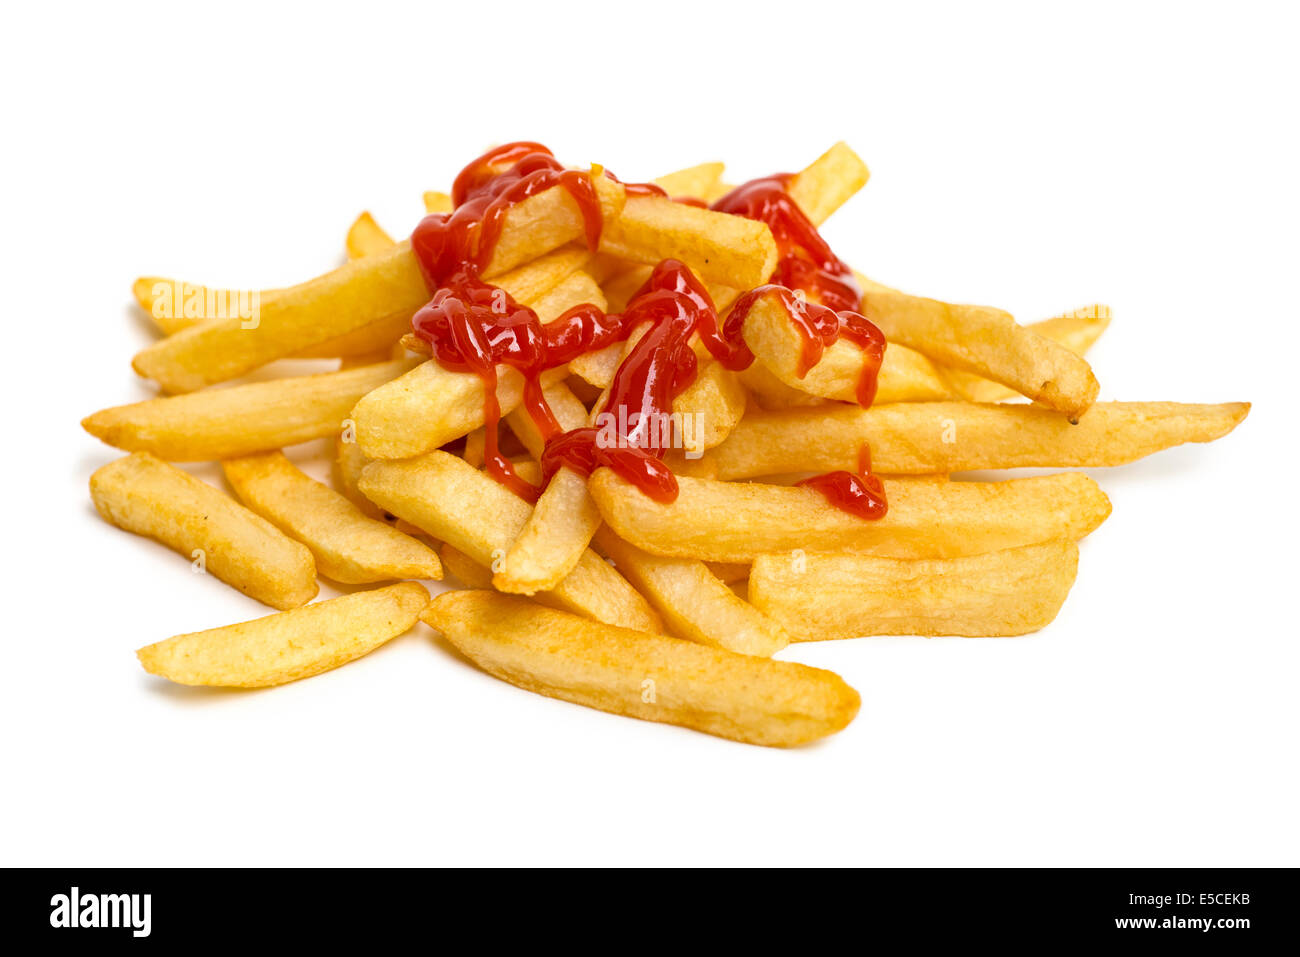 Pommes, Pommes Frites mit Ketchup und Catsup Sauce Stockfoto